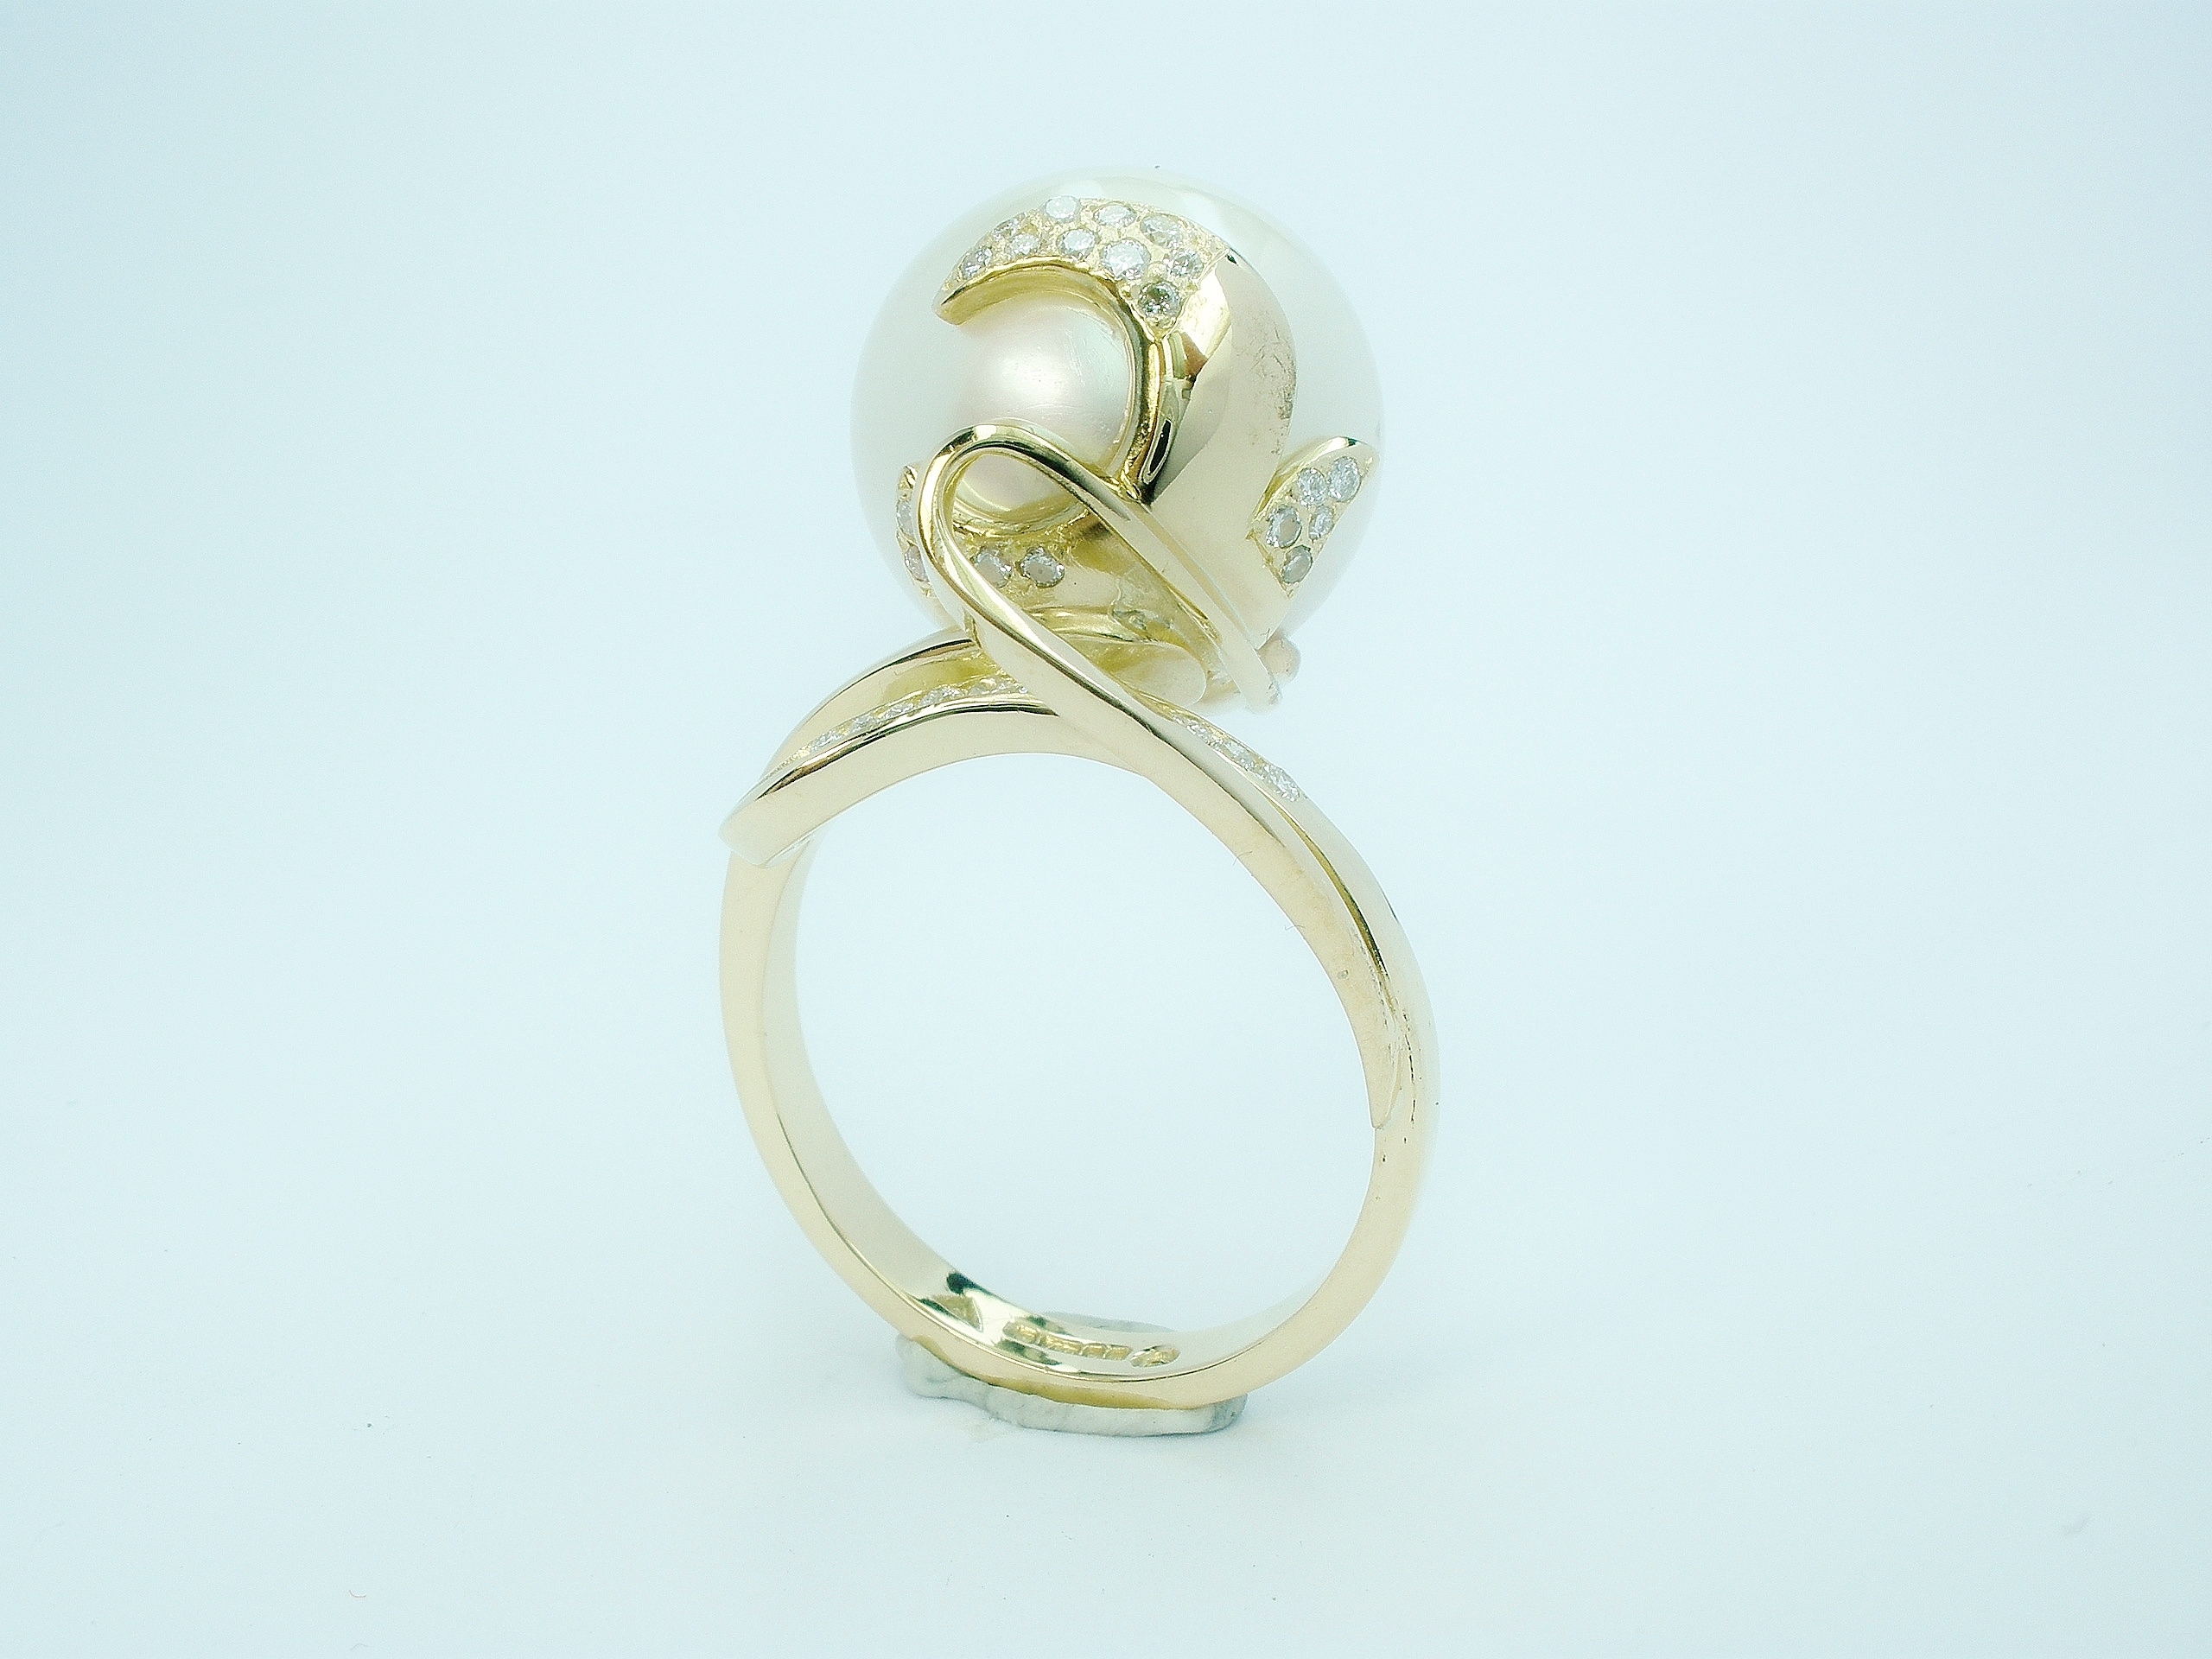 South Sea Pearl (14mm natural pearl) & diamond organically styled 18ct. yellow gold ring.